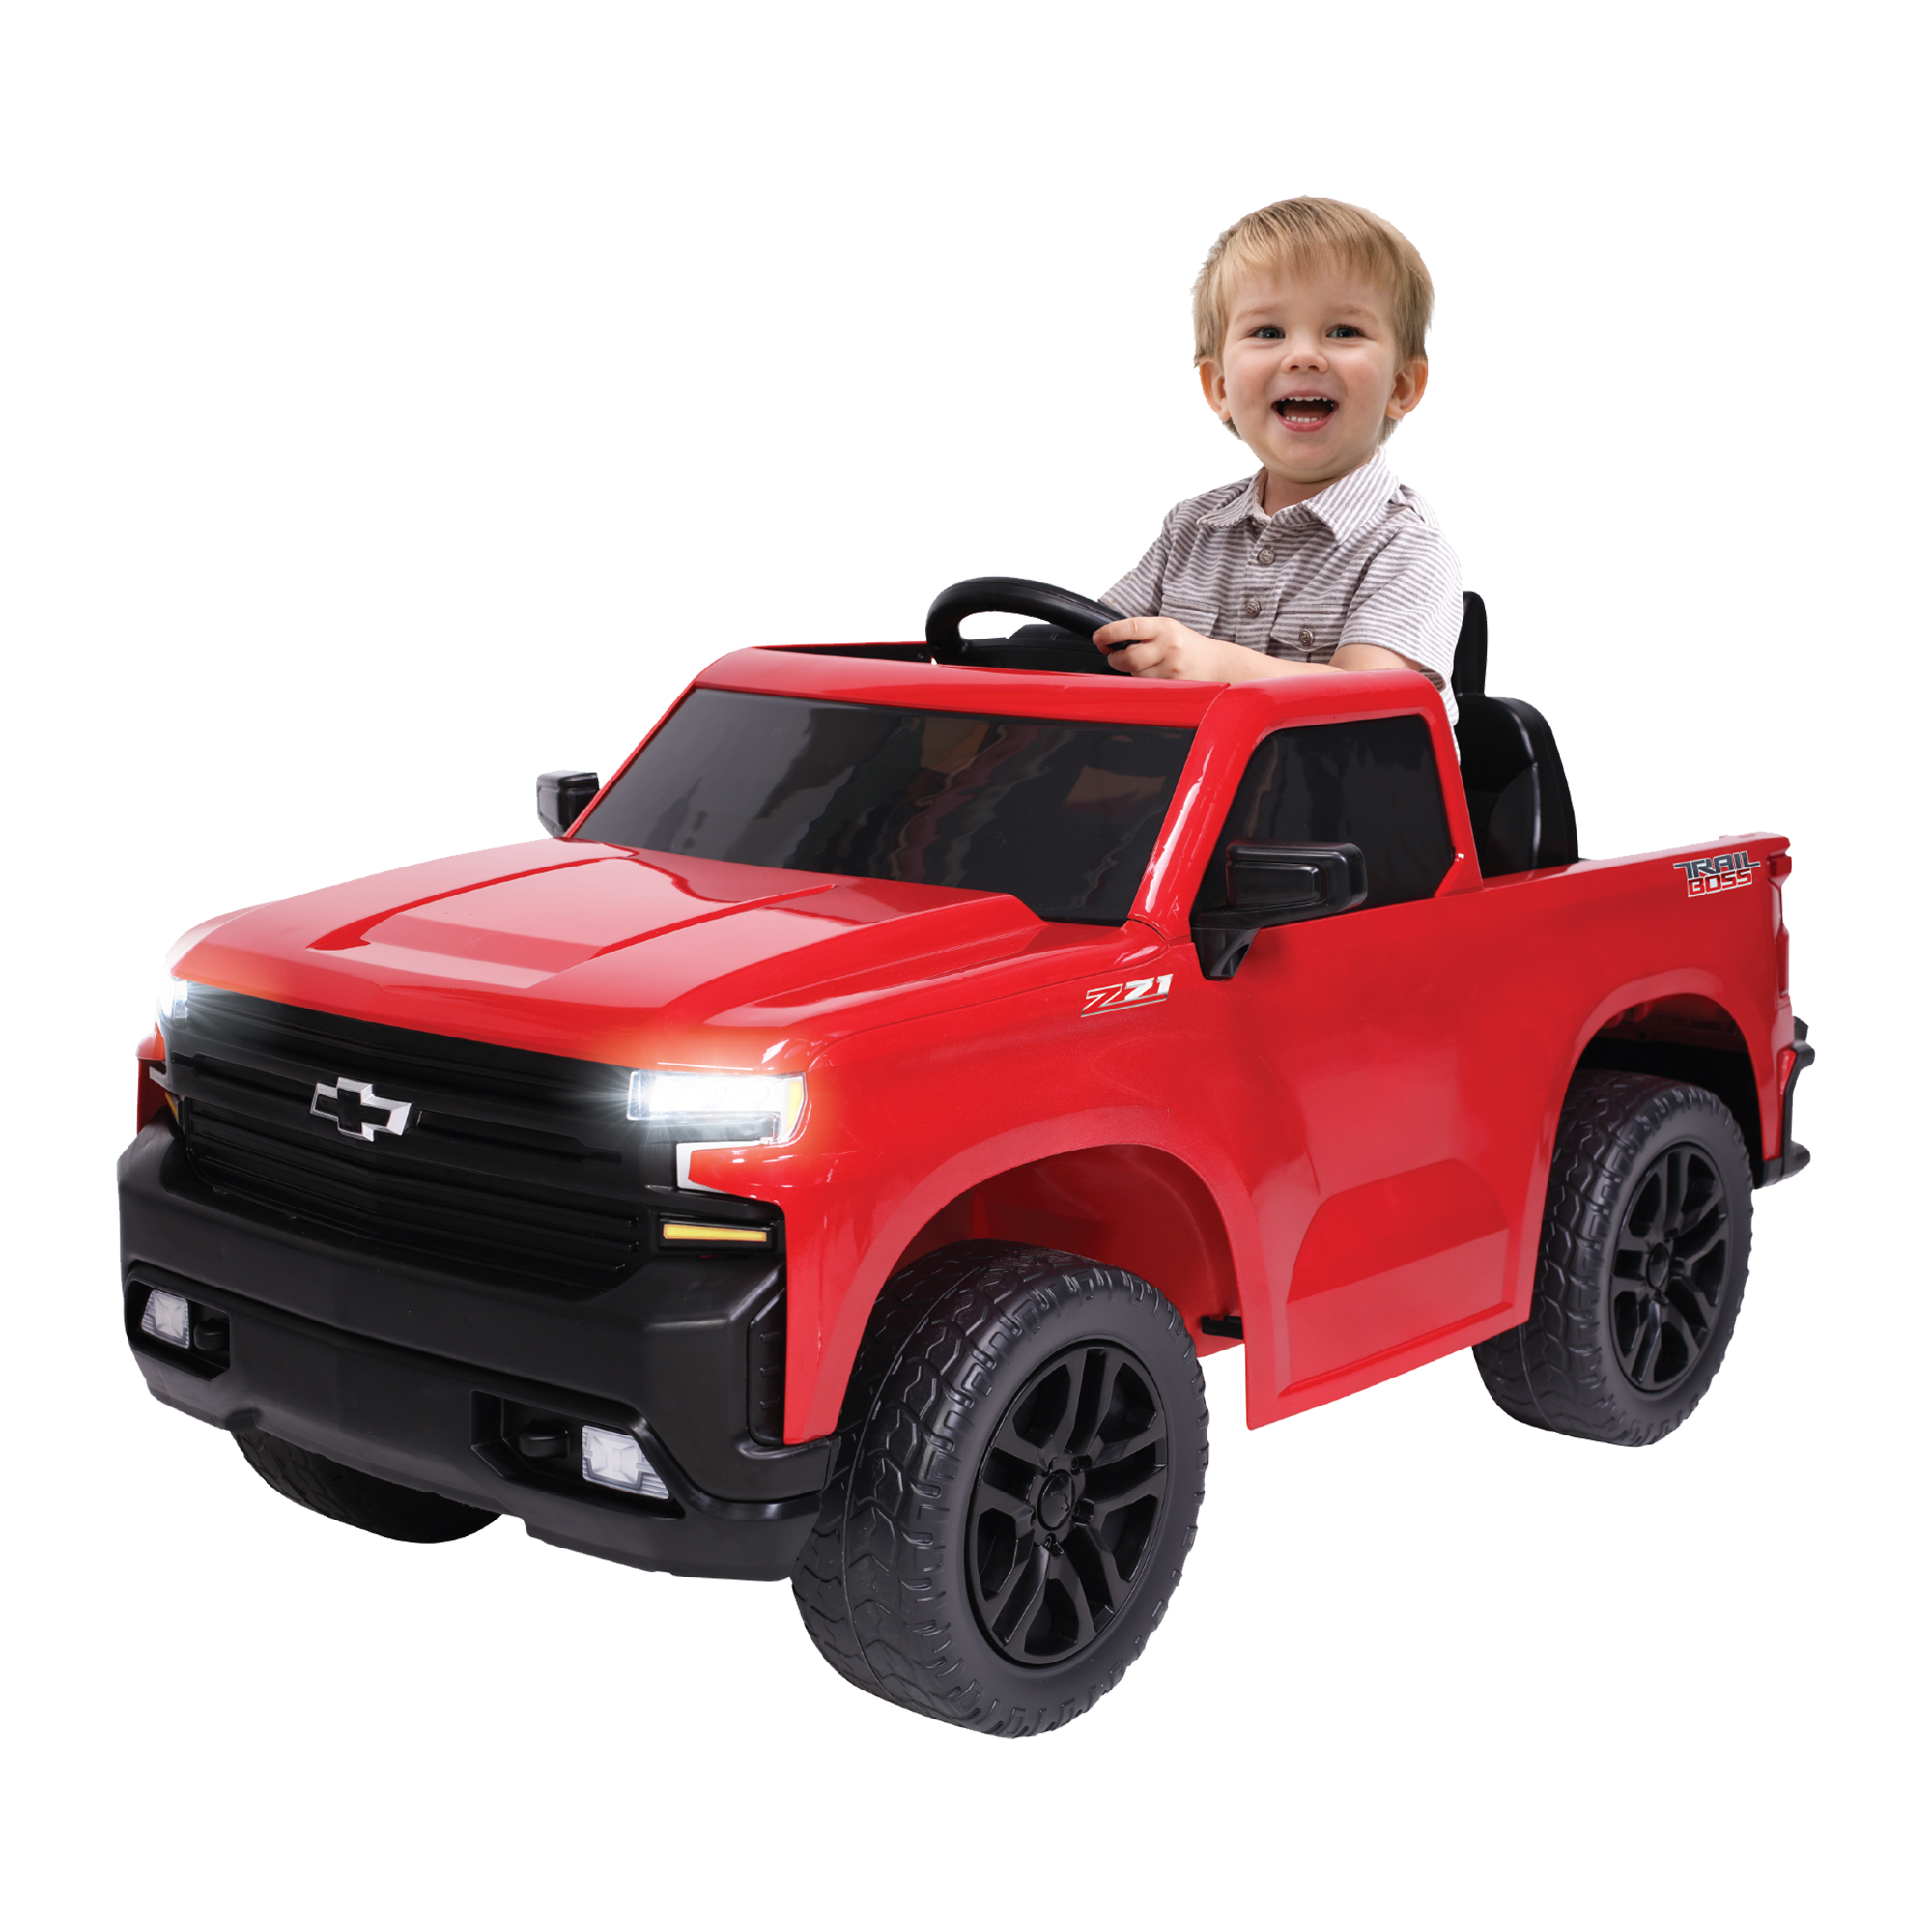 KALEE 6V Chevy Silverado Pick-Up Truck Ride-On Toy Car $98 + Free Shipping